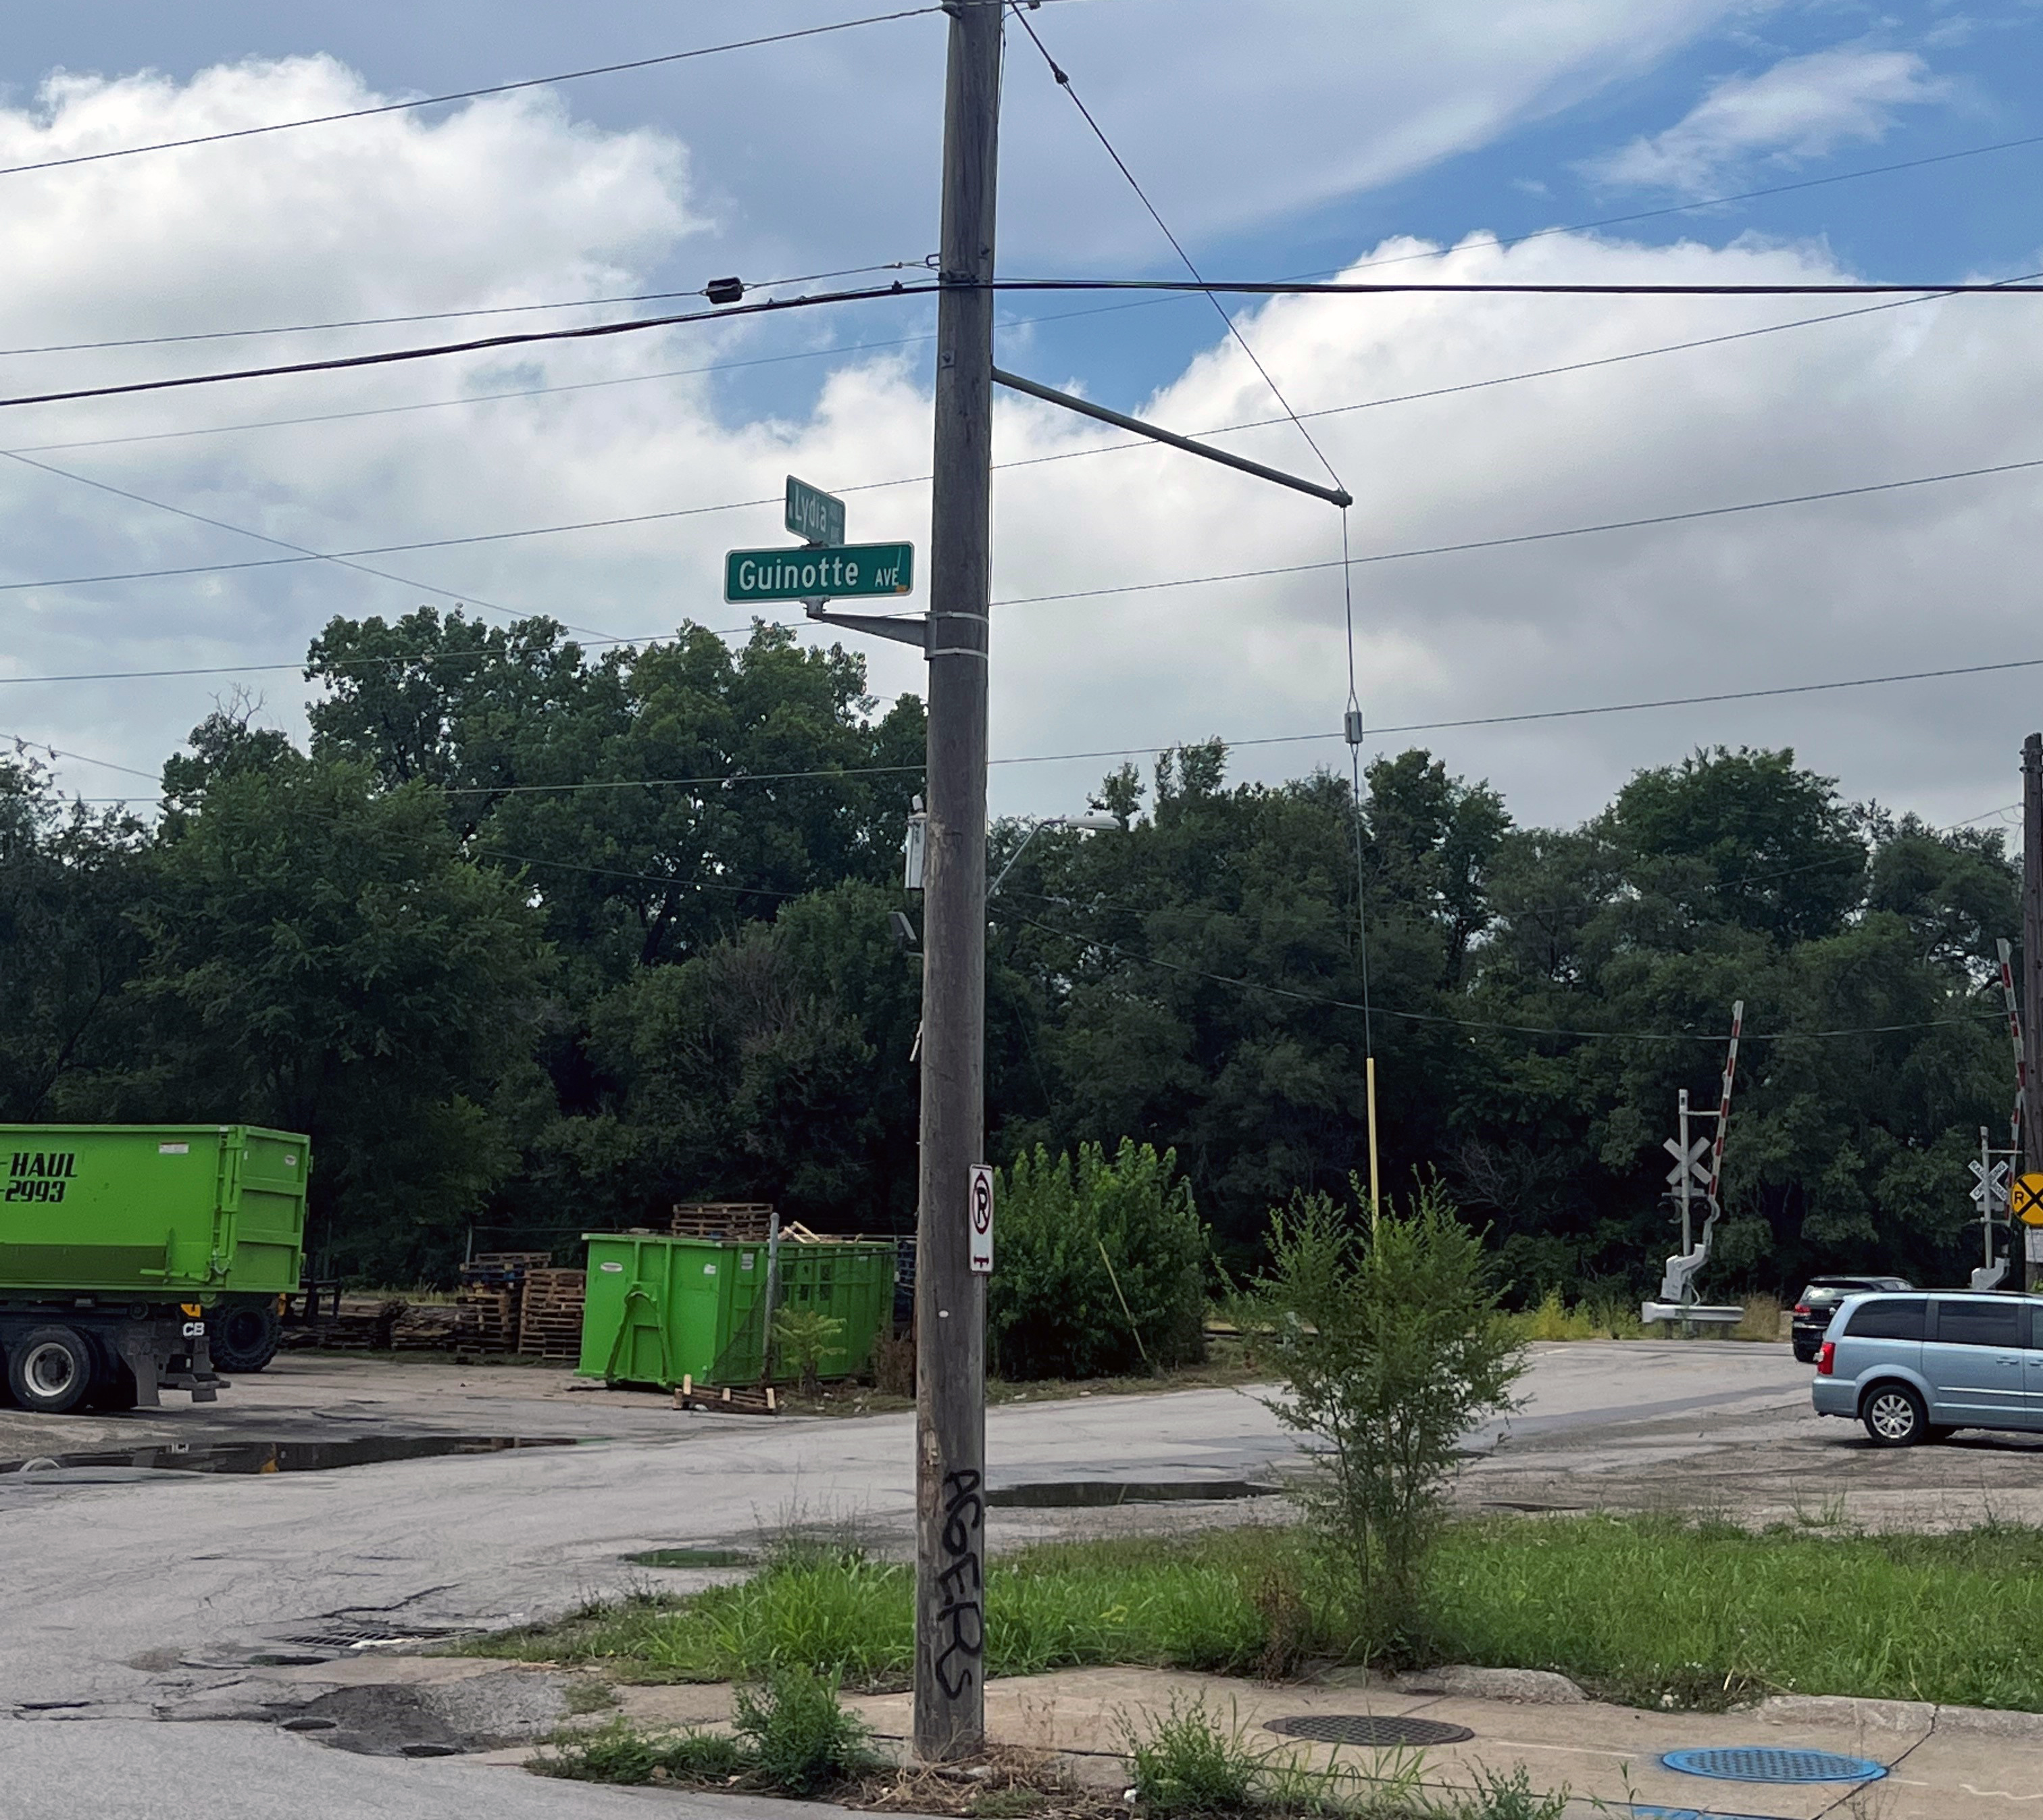 The intersection of Lydia and Guinotte avenues. The tracks of the Union Pacific Railroad, seen in the rear of the image, follow Guinotte’s Railroad Avenue. PATRICK SALLAND